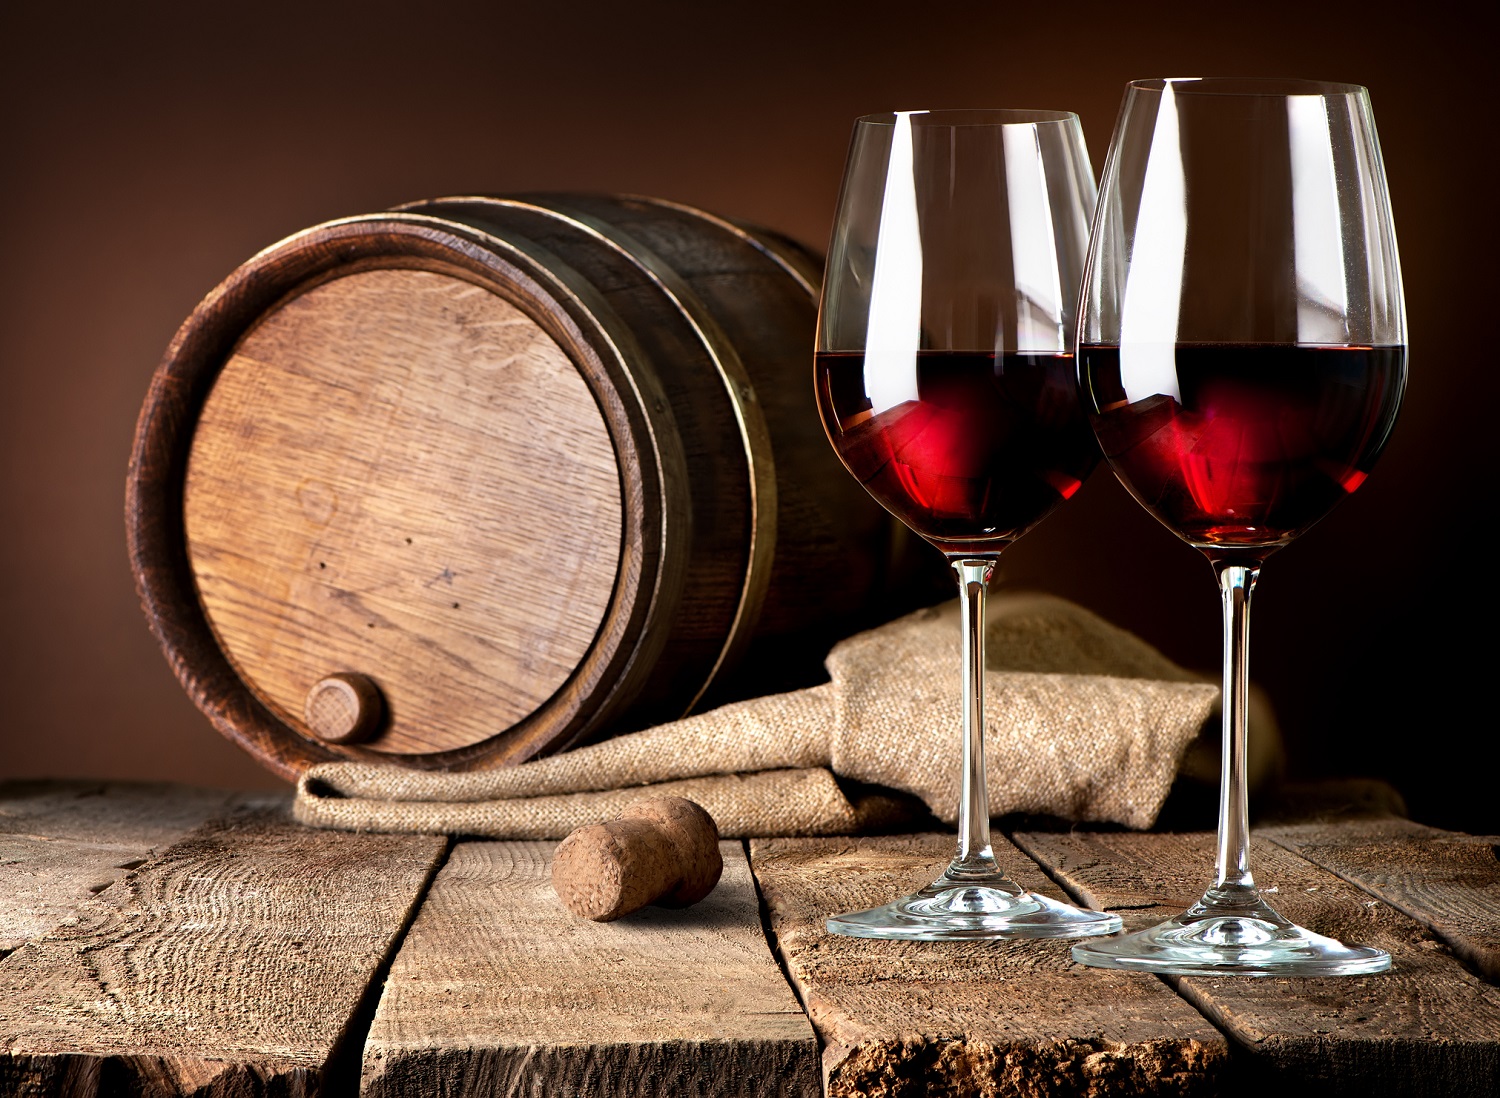 Barrel and wineglasses of red wine on a wooden table